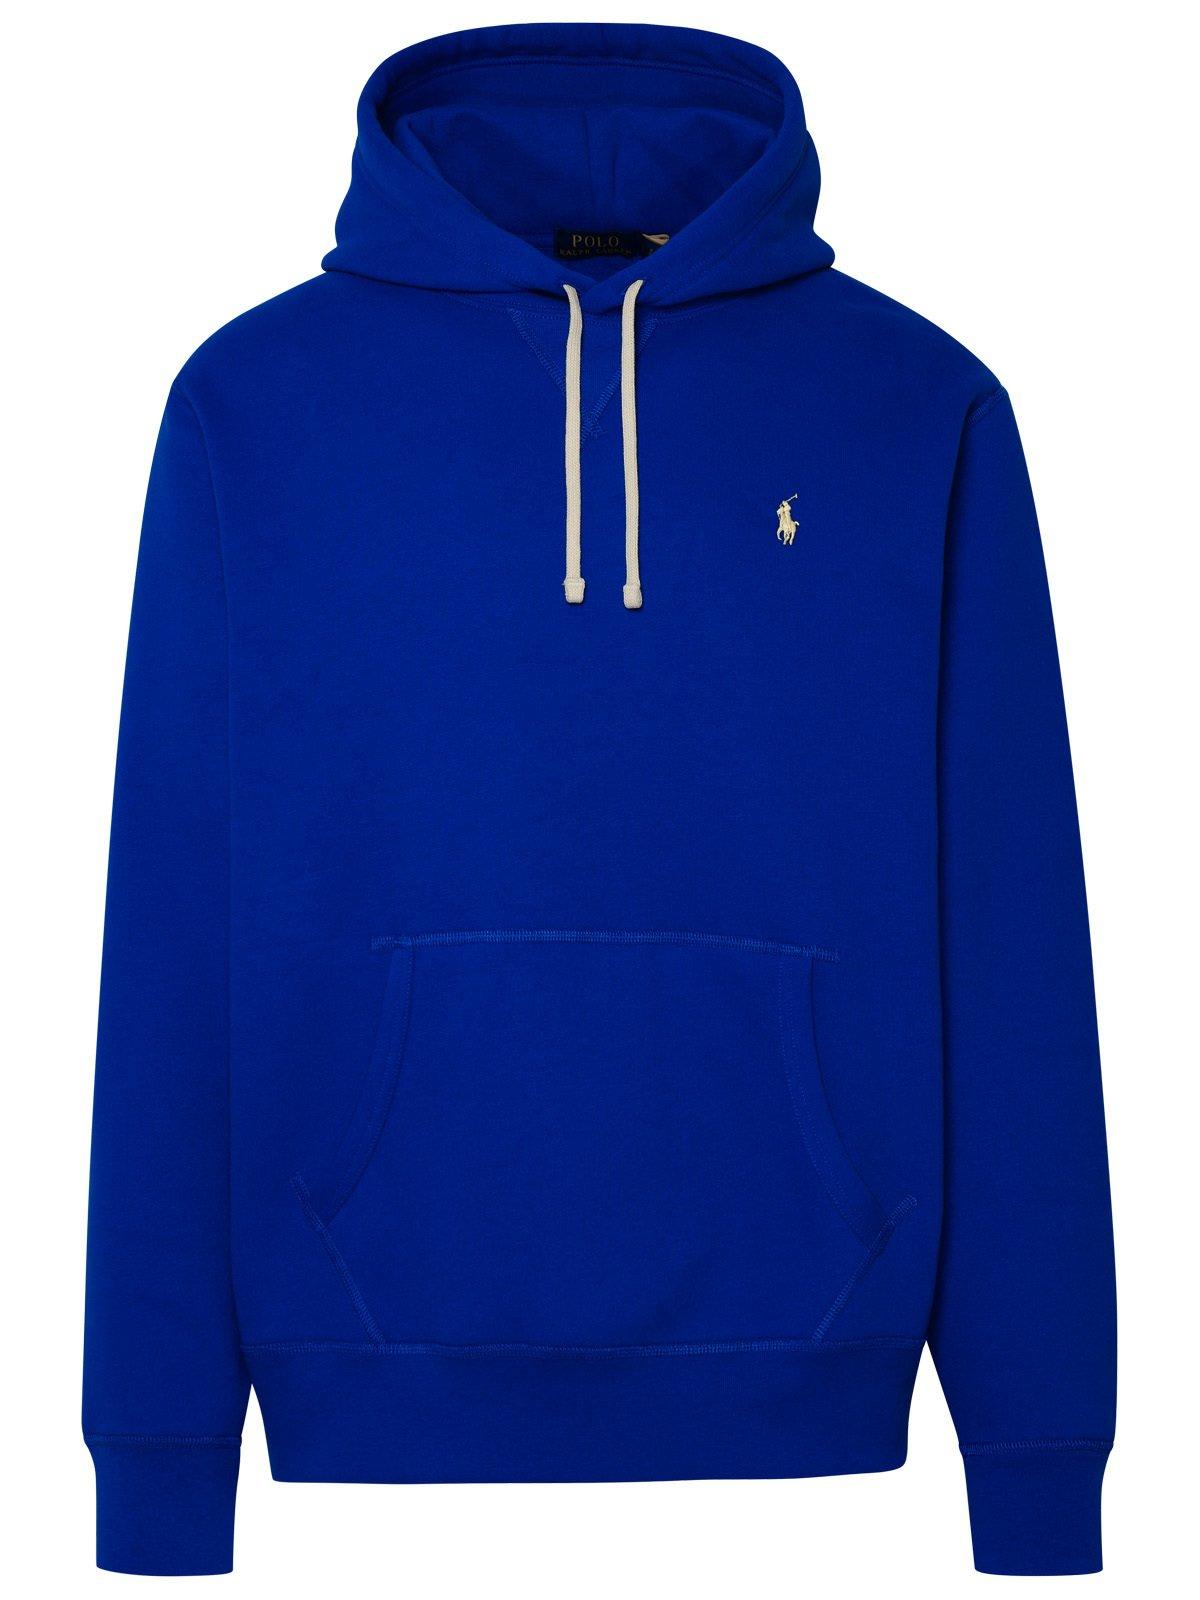 POLO RALPH LAUREN PONY EMBROIDERED DRAWSTRING HOODIE